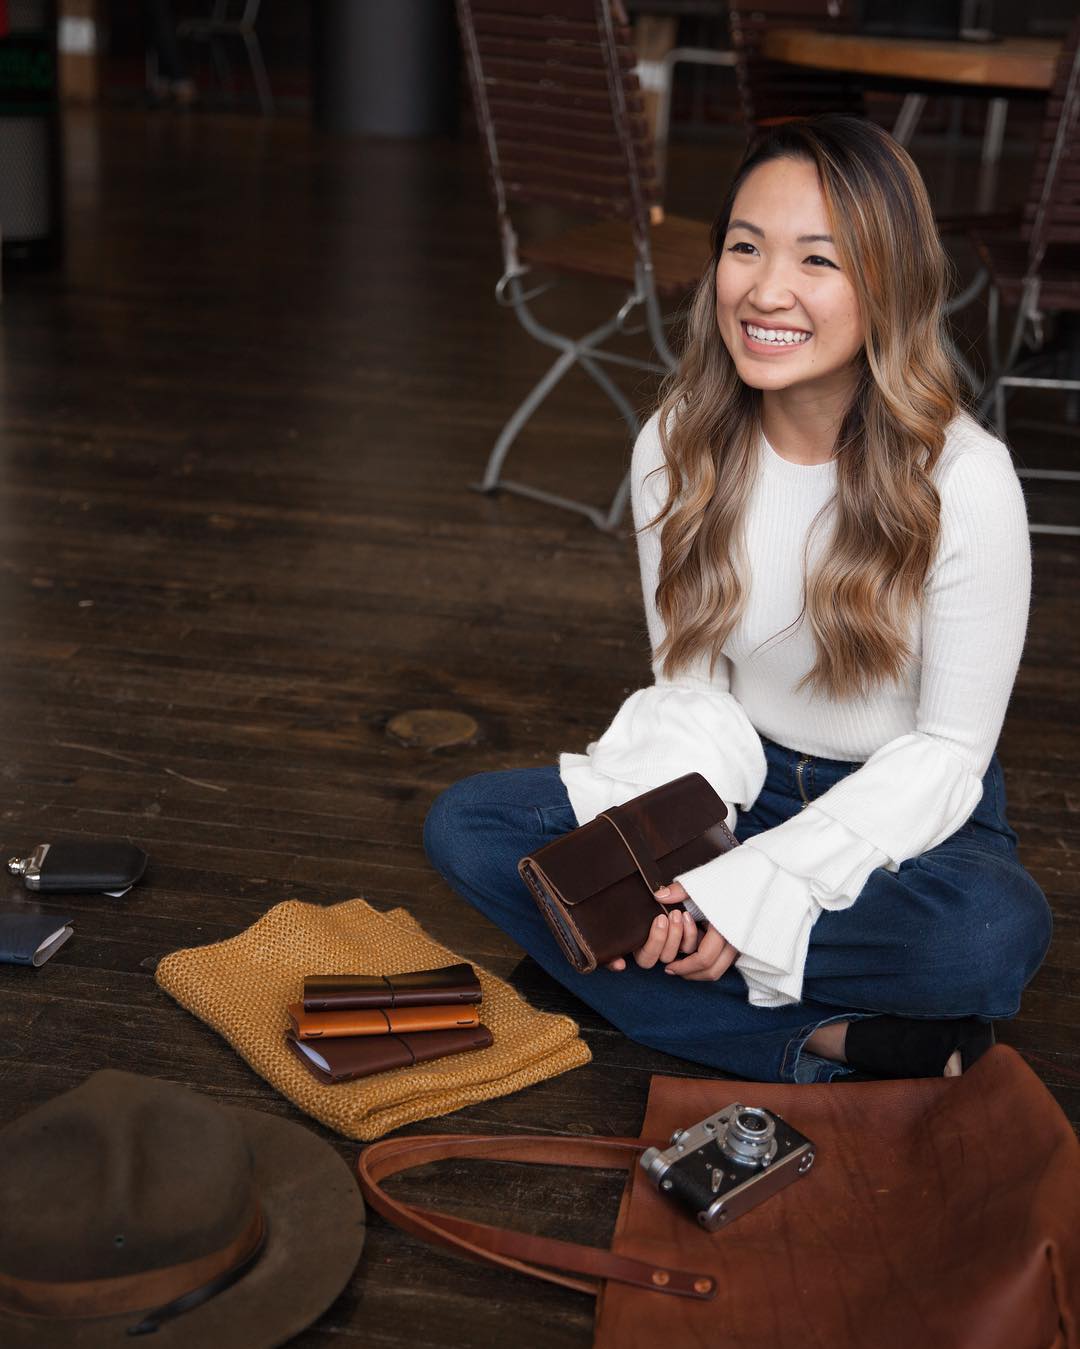 Handmade leather goods by KMM & Co. | leather tote bags, wallets, and clutches